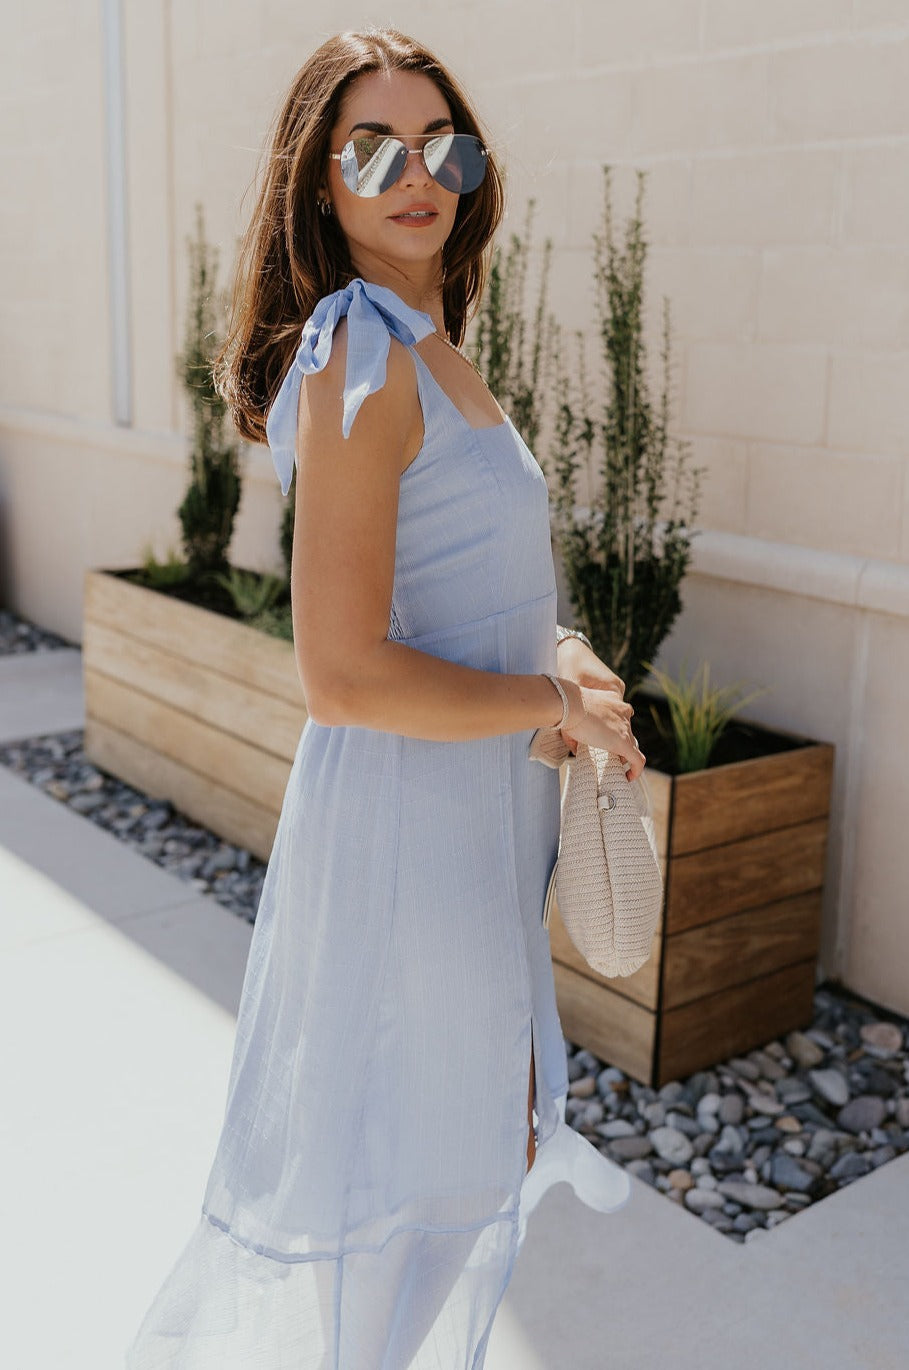 Side view of female model wearing the Laurel Light Blue Slit Midi Dress which features Light Blue Lightweight Fabric, Ruffle Hem, Light Blue Lining, Midi Length, Textured Details, Square Neckline and Tie Straps